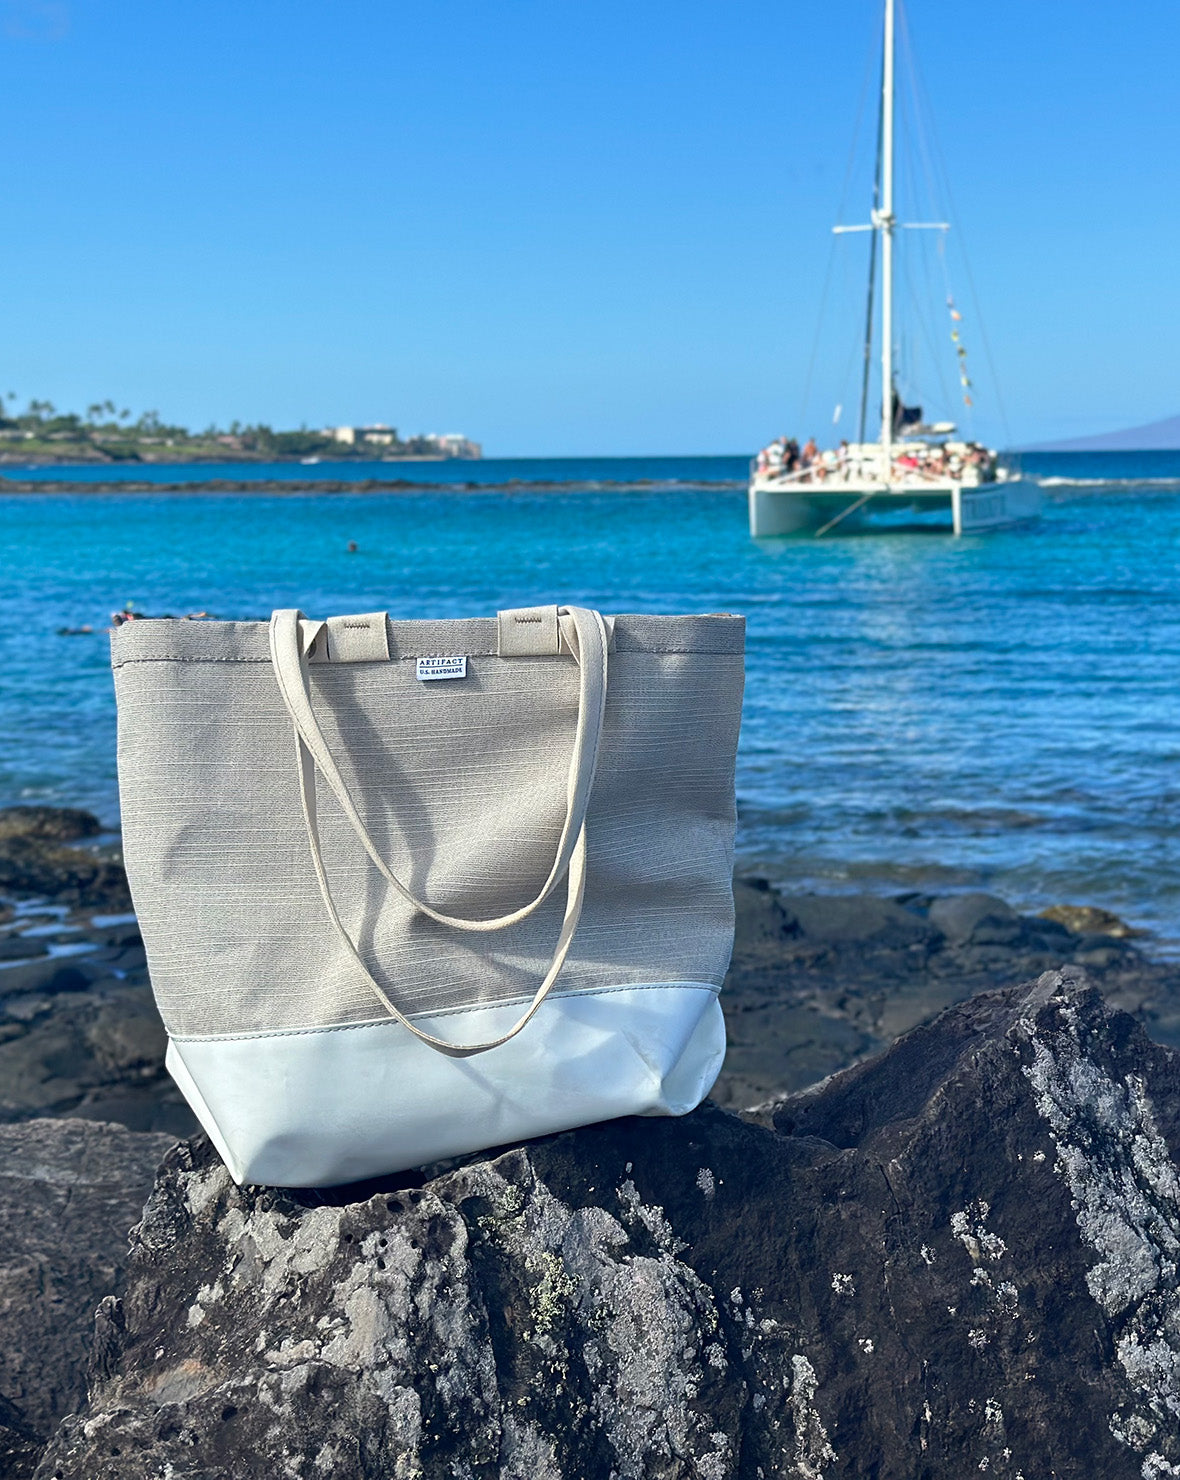 ARTIFACT No.112 Tote in Vintage Up-Cycled Awning Material: Maui, Hawaii